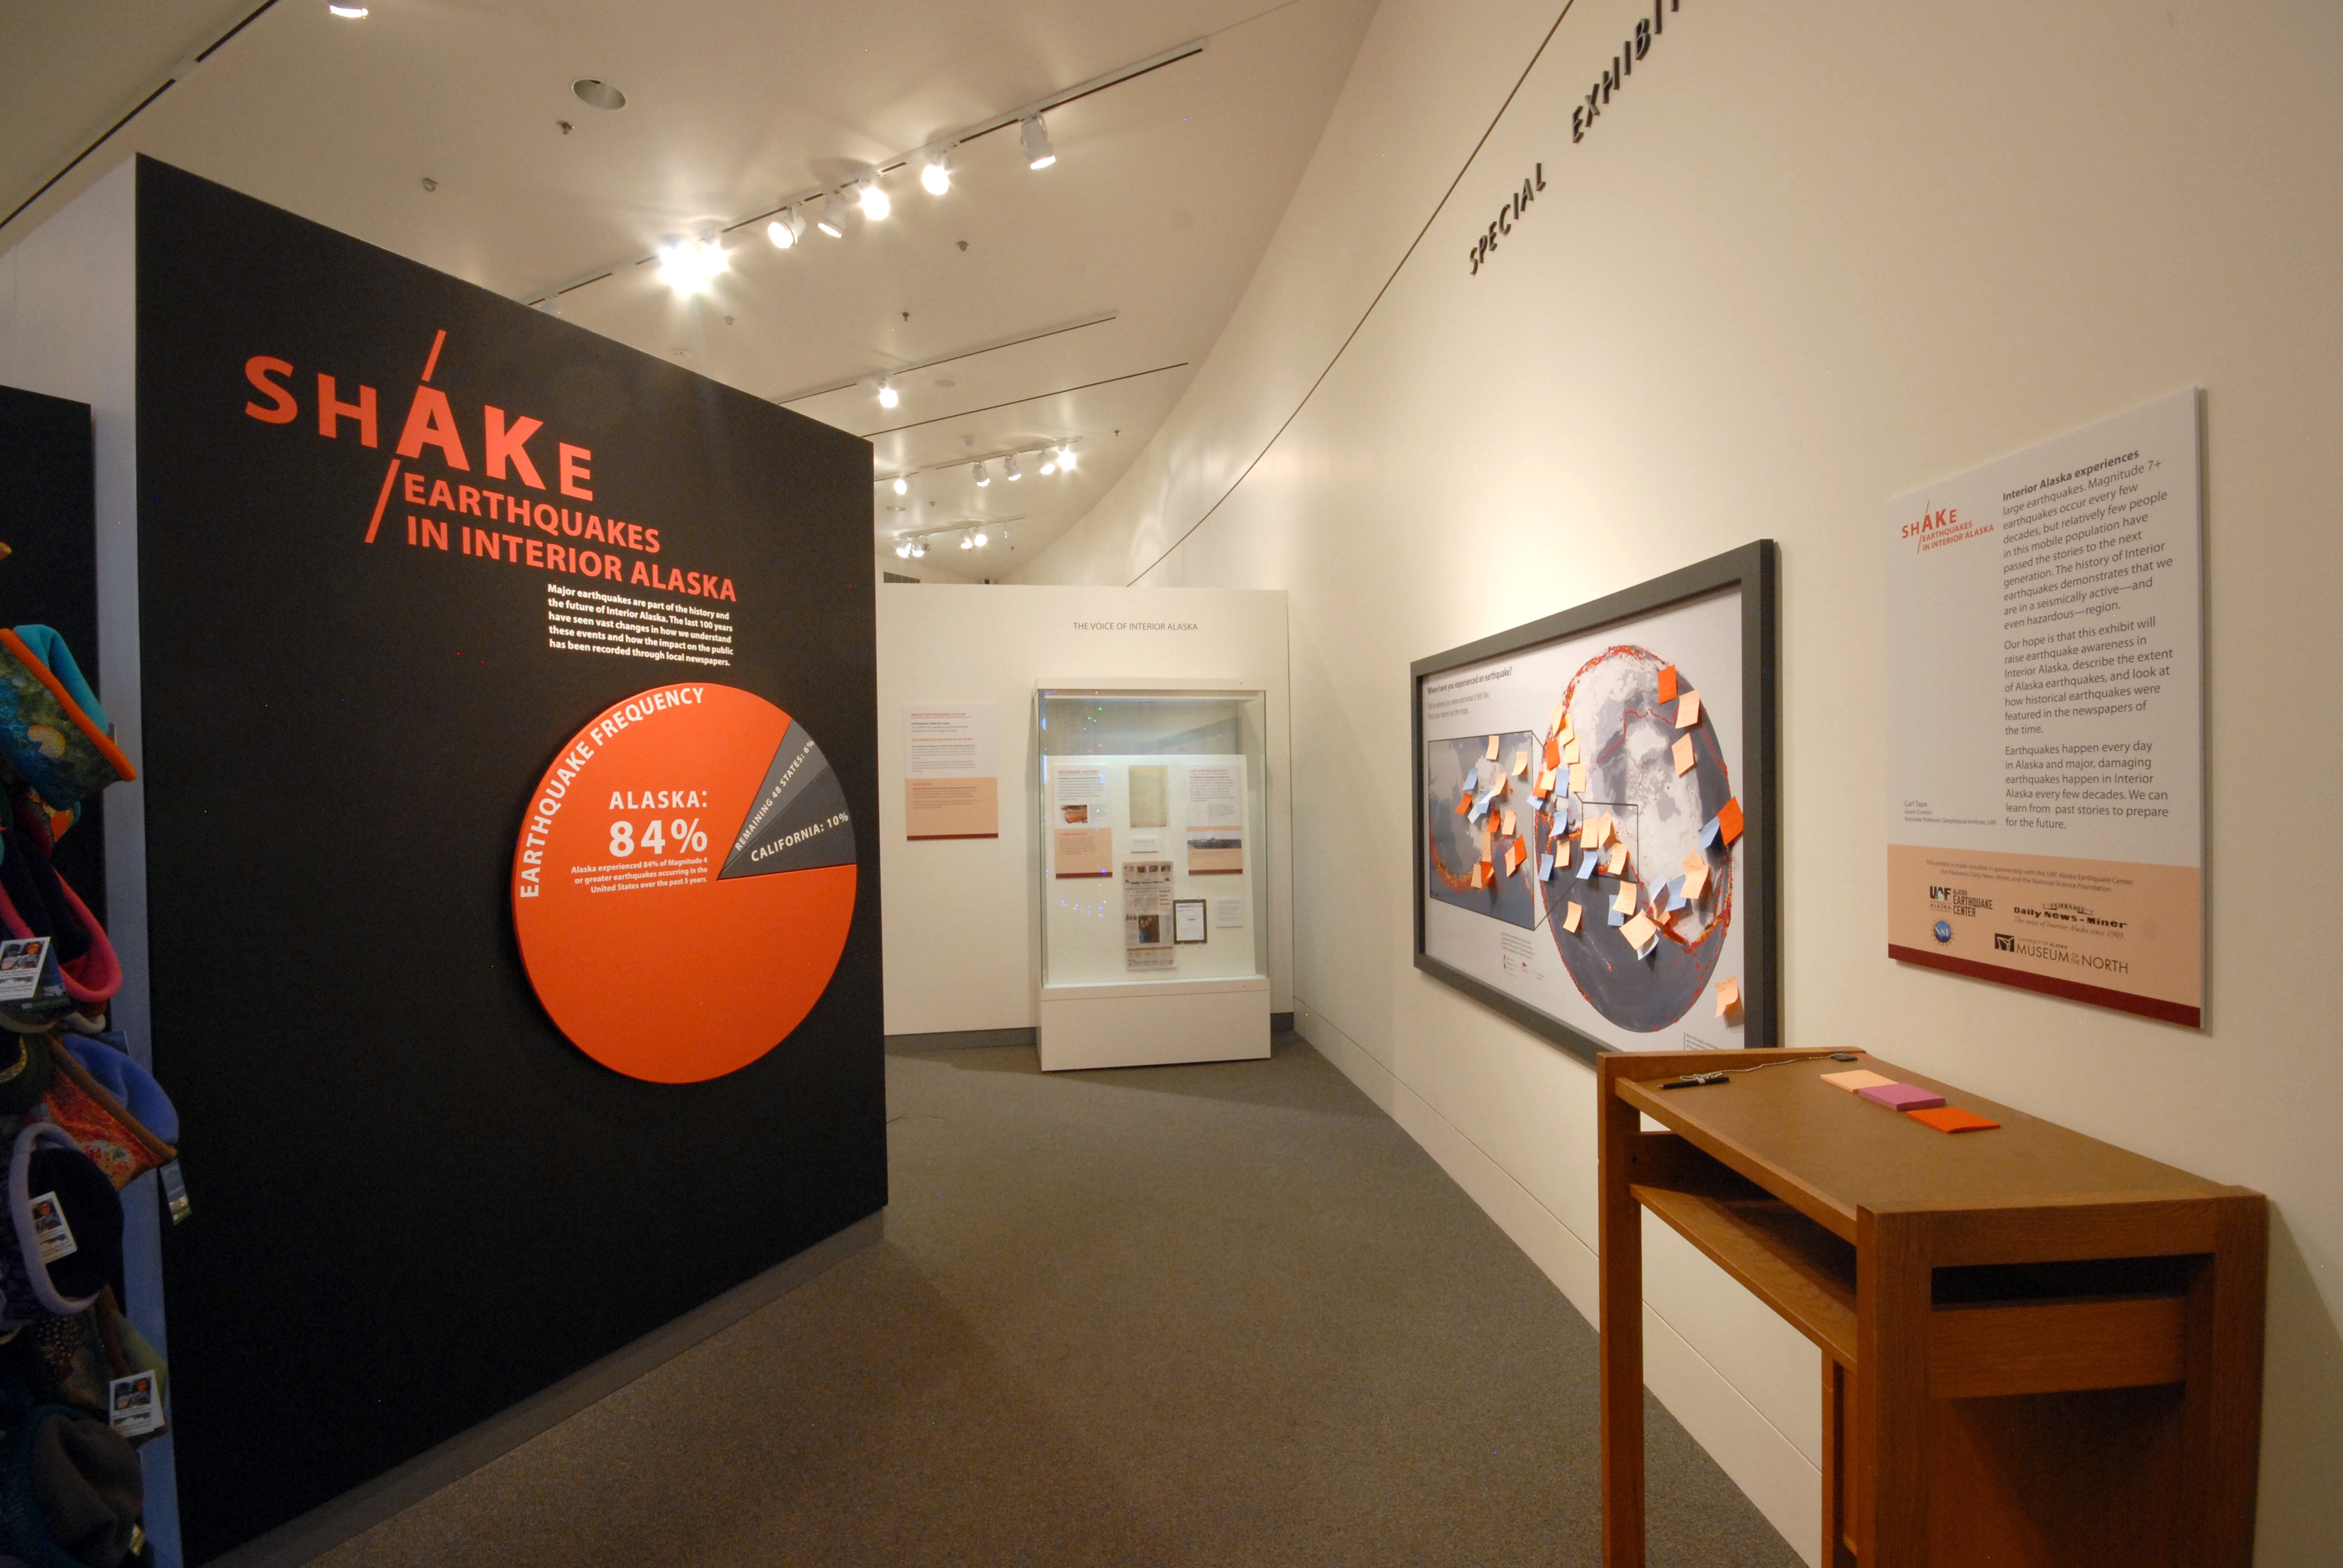 The entry to the Shake exhibit